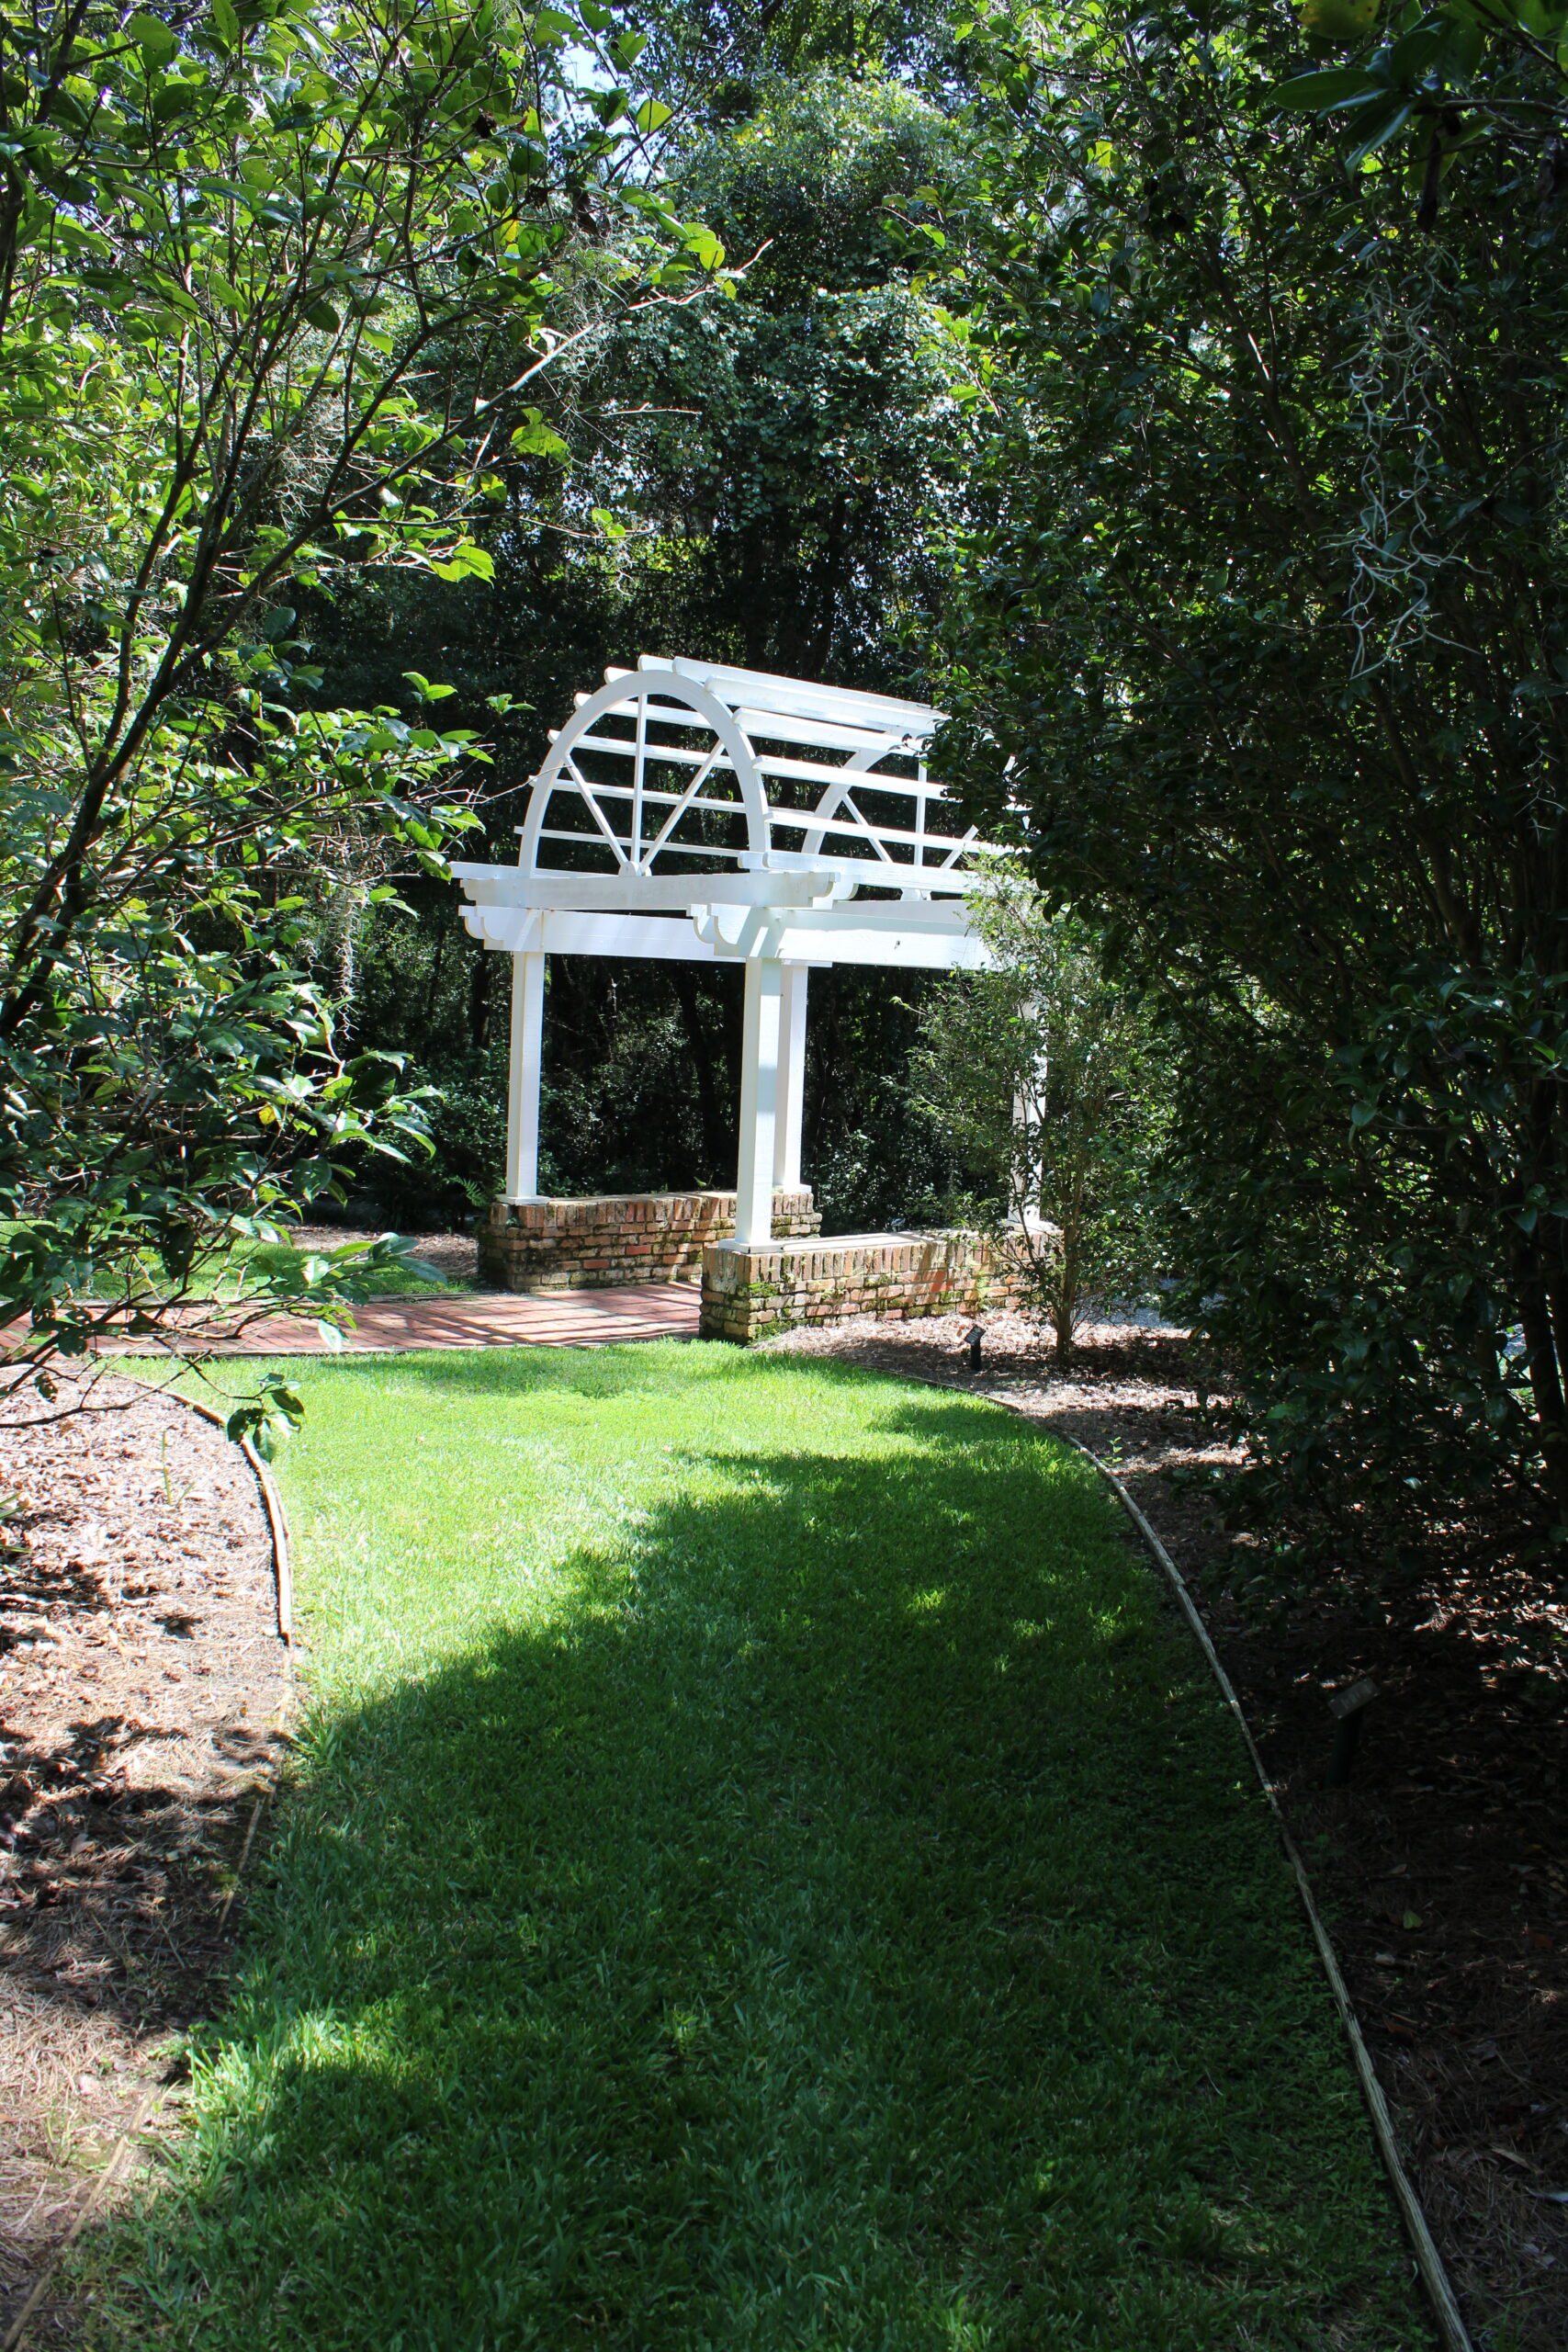 Decorative photo taken by a Tallahassee real estate agent. Shows a white pergola with a bridge. This can be found at Oven Park on Thomasville Road